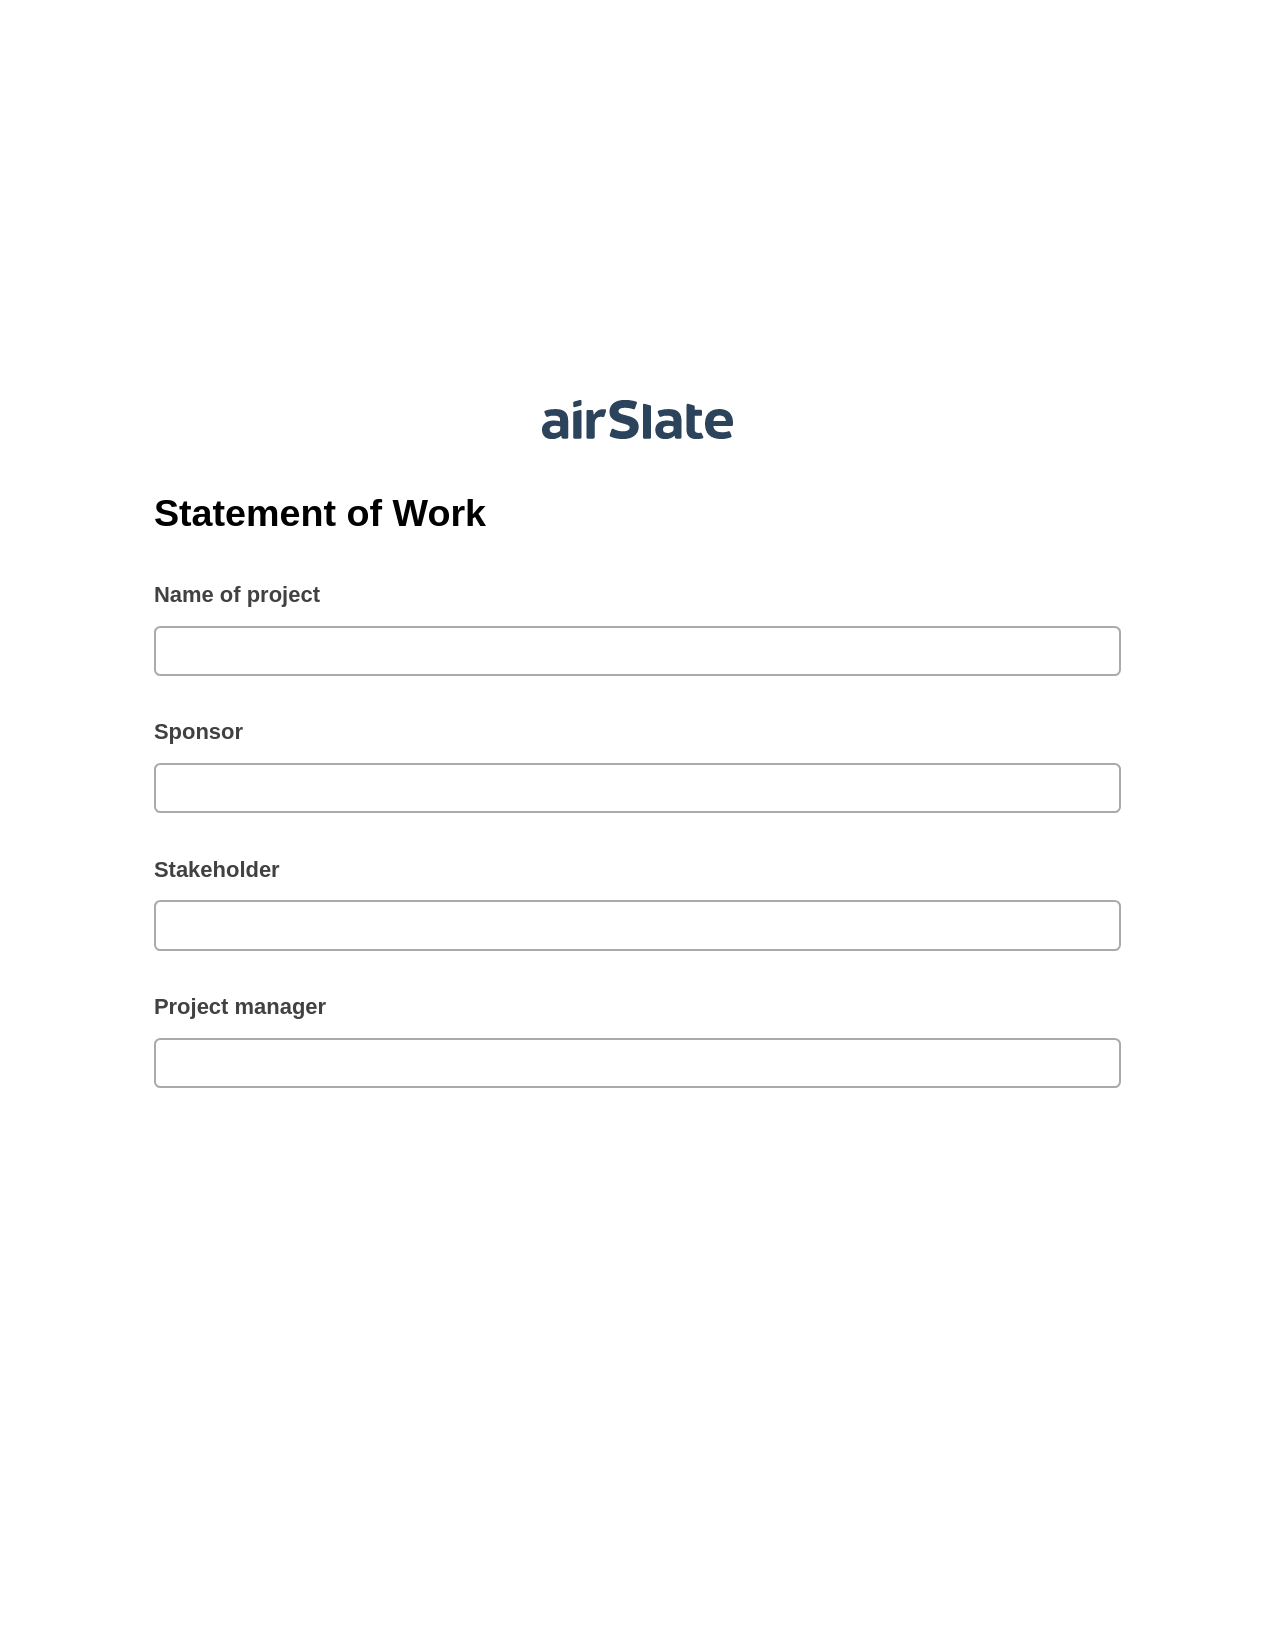 Statement of Work Pre-fill from Google Sheet Dropdown Options Bot, Send Slate to MS Dynamics 365 Contact DEPRECATED, Webhook Postfinish Bot